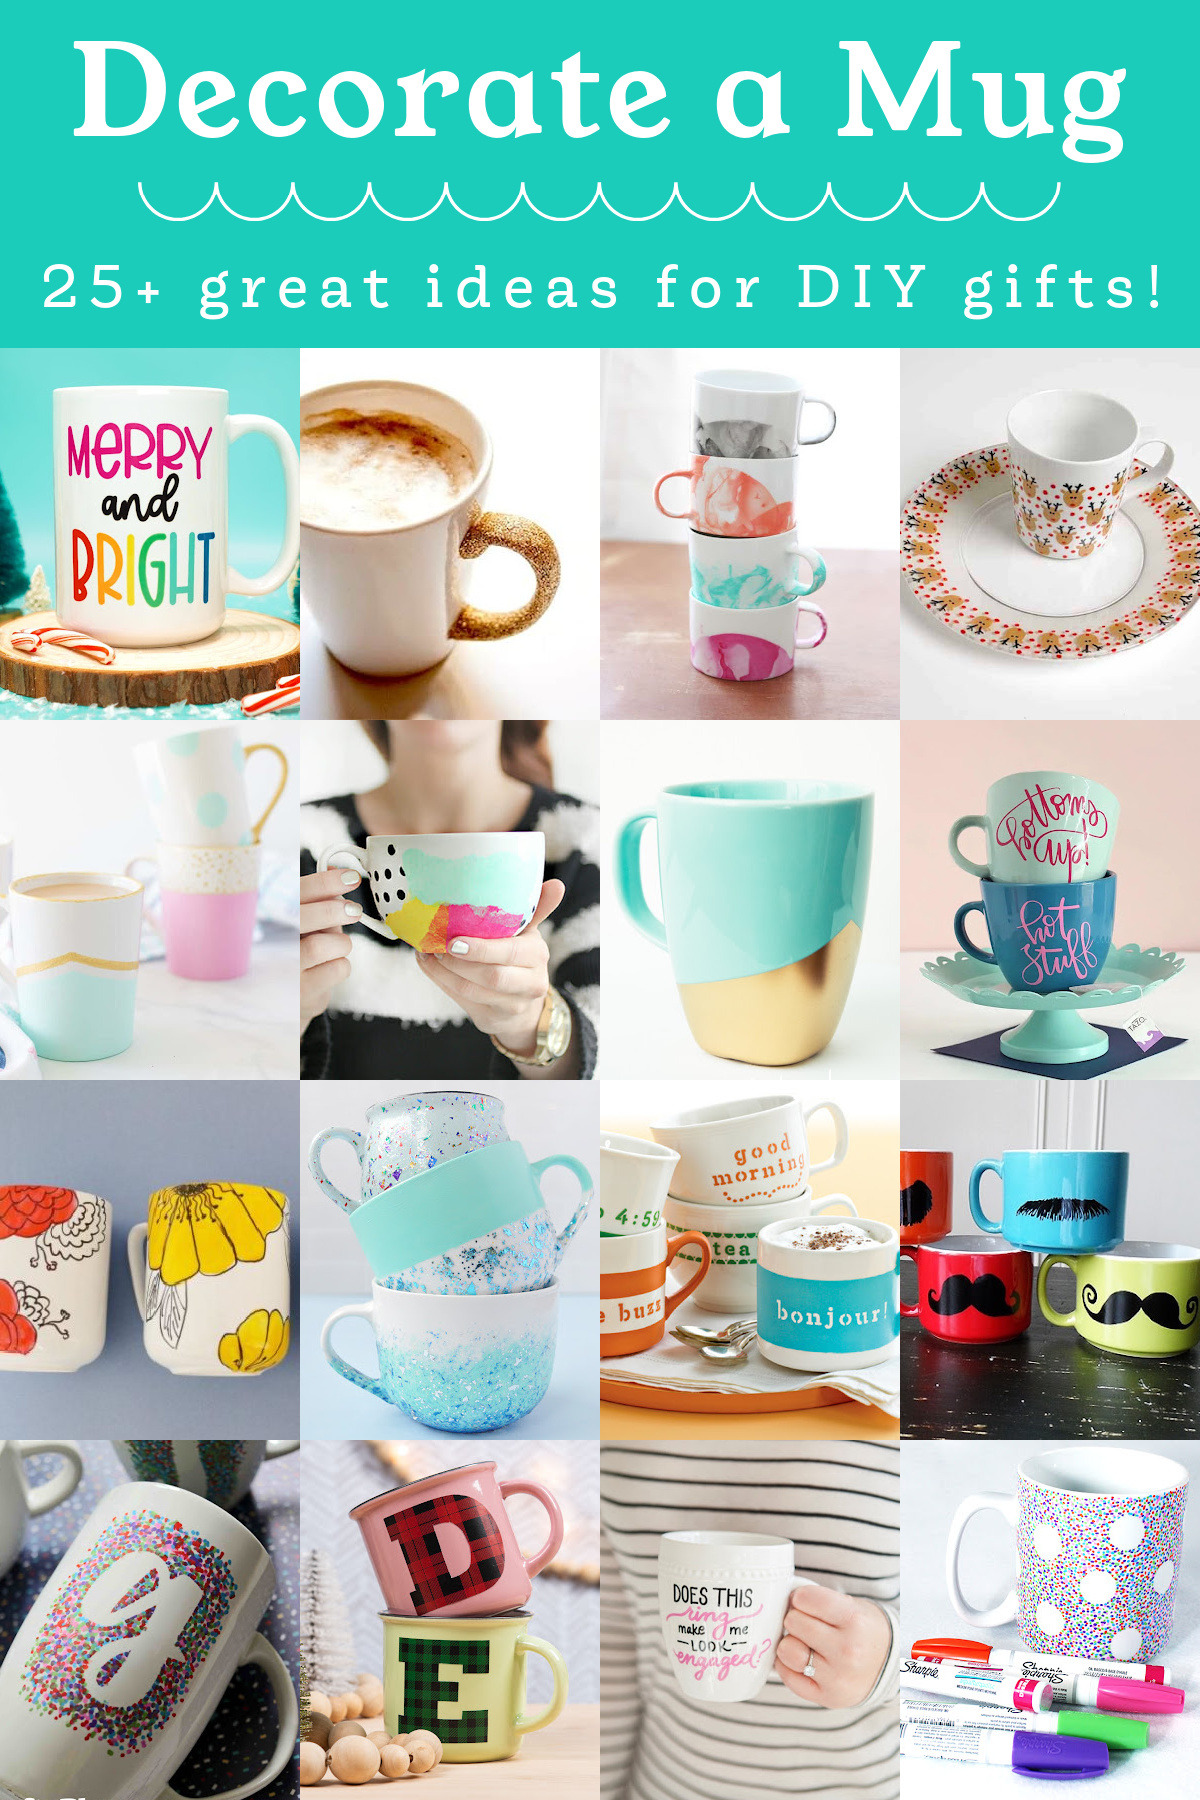 Decorate Mugs with These Fun and Easy Ideas!